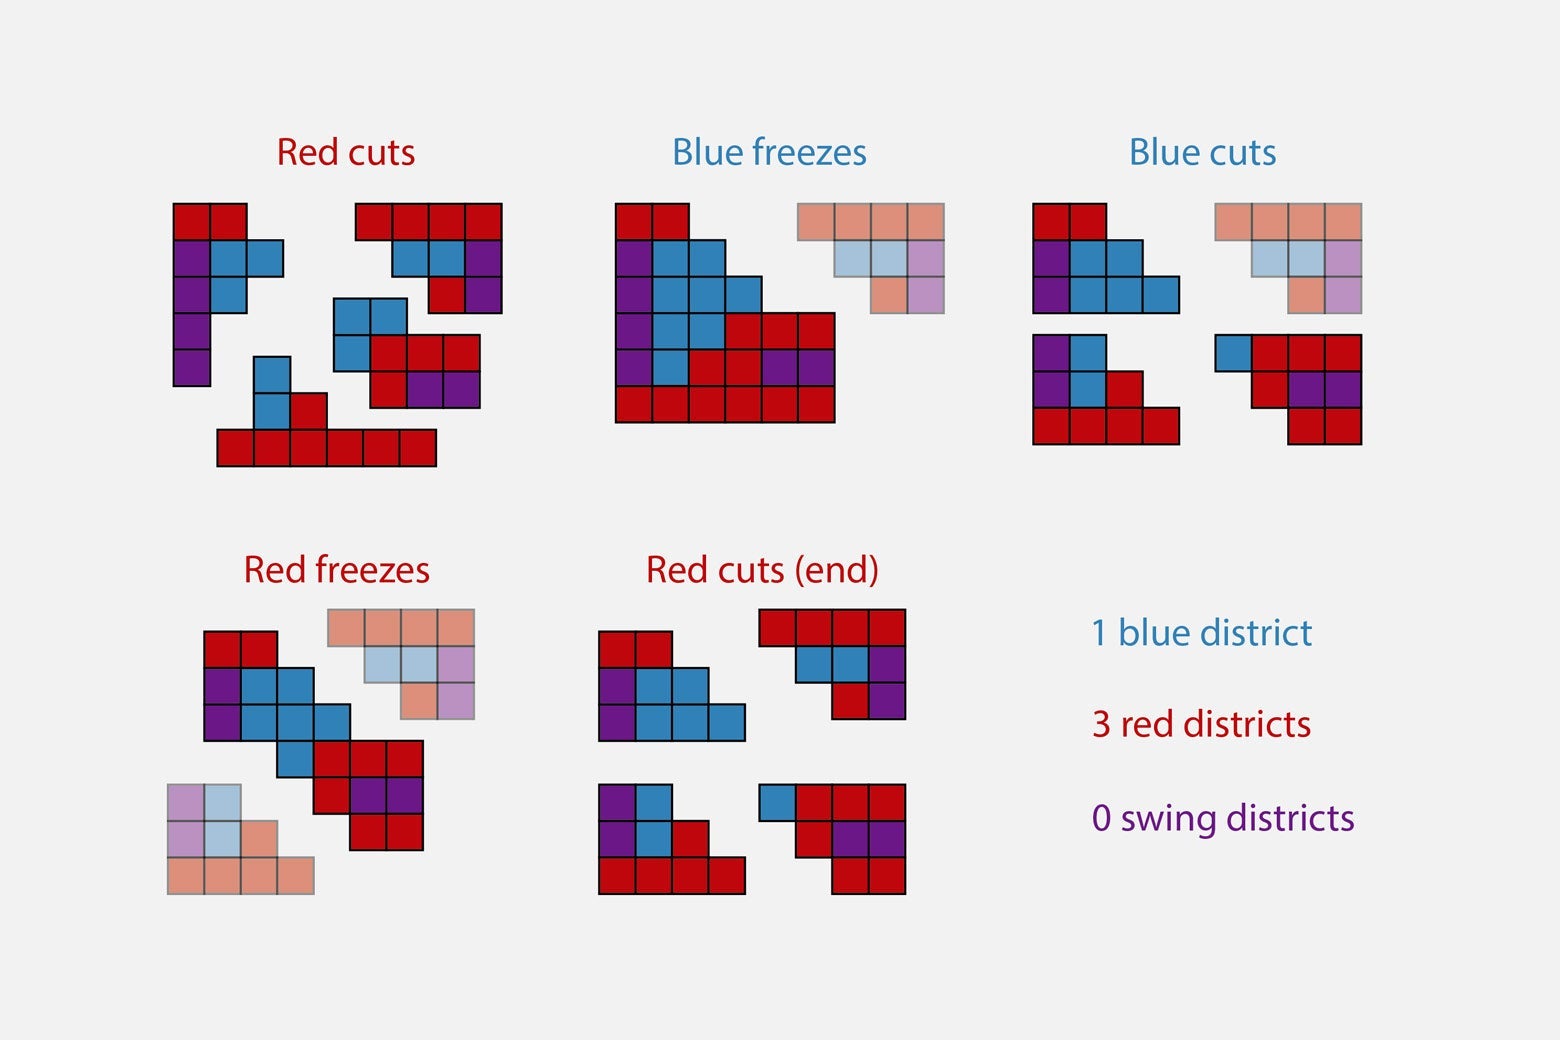 Red cuts, blue freezes, blue cuts, red freezes, red cuts, resulting in: 1 blue district, 3 red districts, 0 swing districts. 